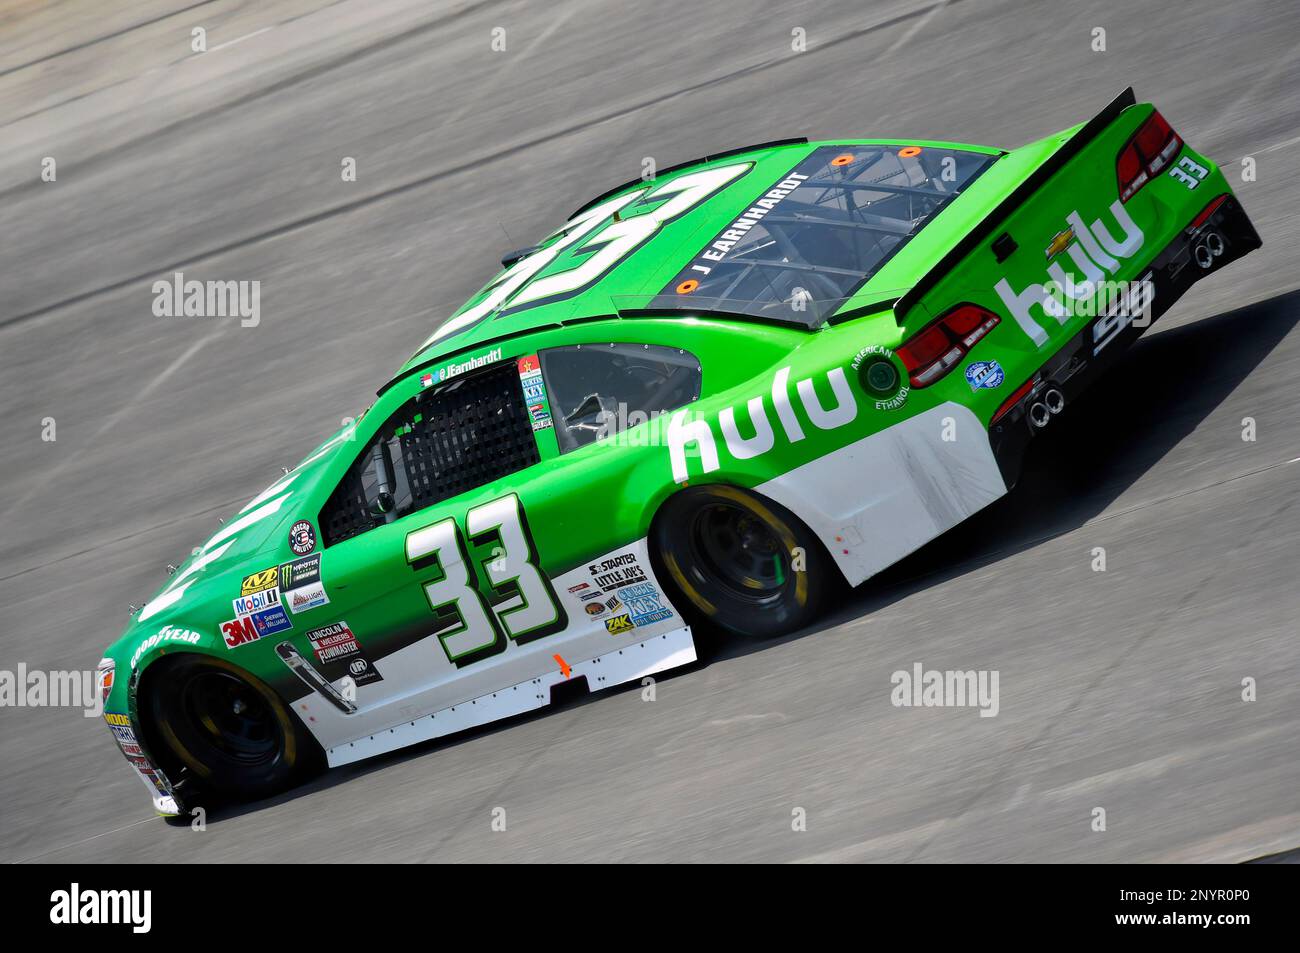 Jeffrey Earnhardt, Circle Sport / TMG, Hulu, Chevrolet SS during the NASCAR Monster Energy Cup Series AAA 400 race at Dover International Speedway, Sunday, June